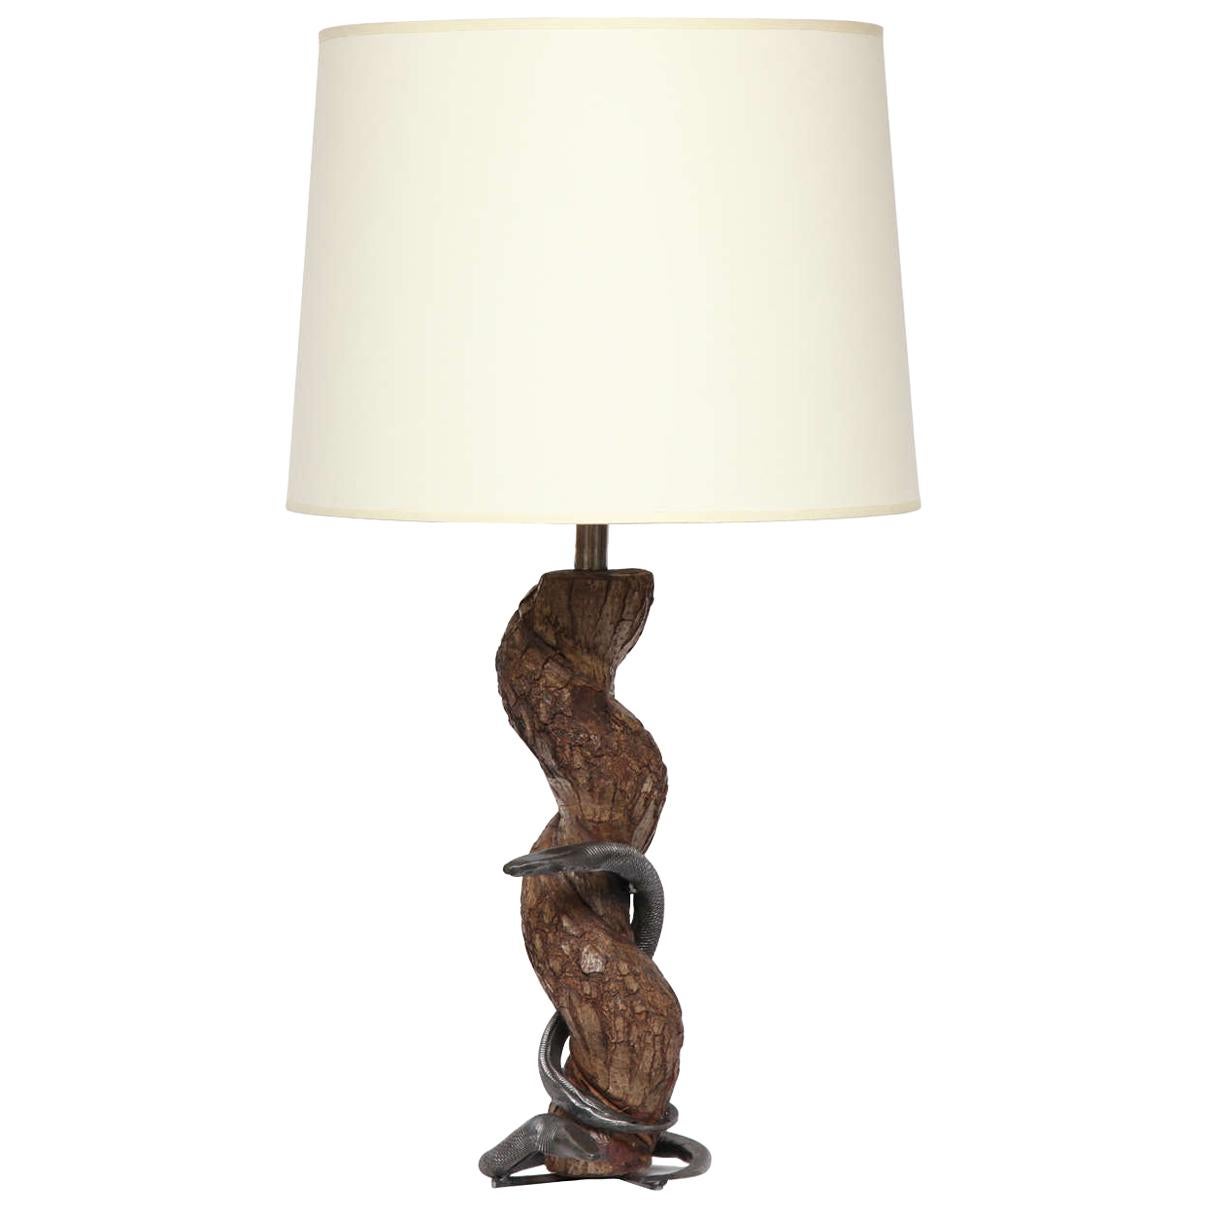 Table Lamp Sculptural Snake Wood and Wrought Iron, France, 1940s For Sale